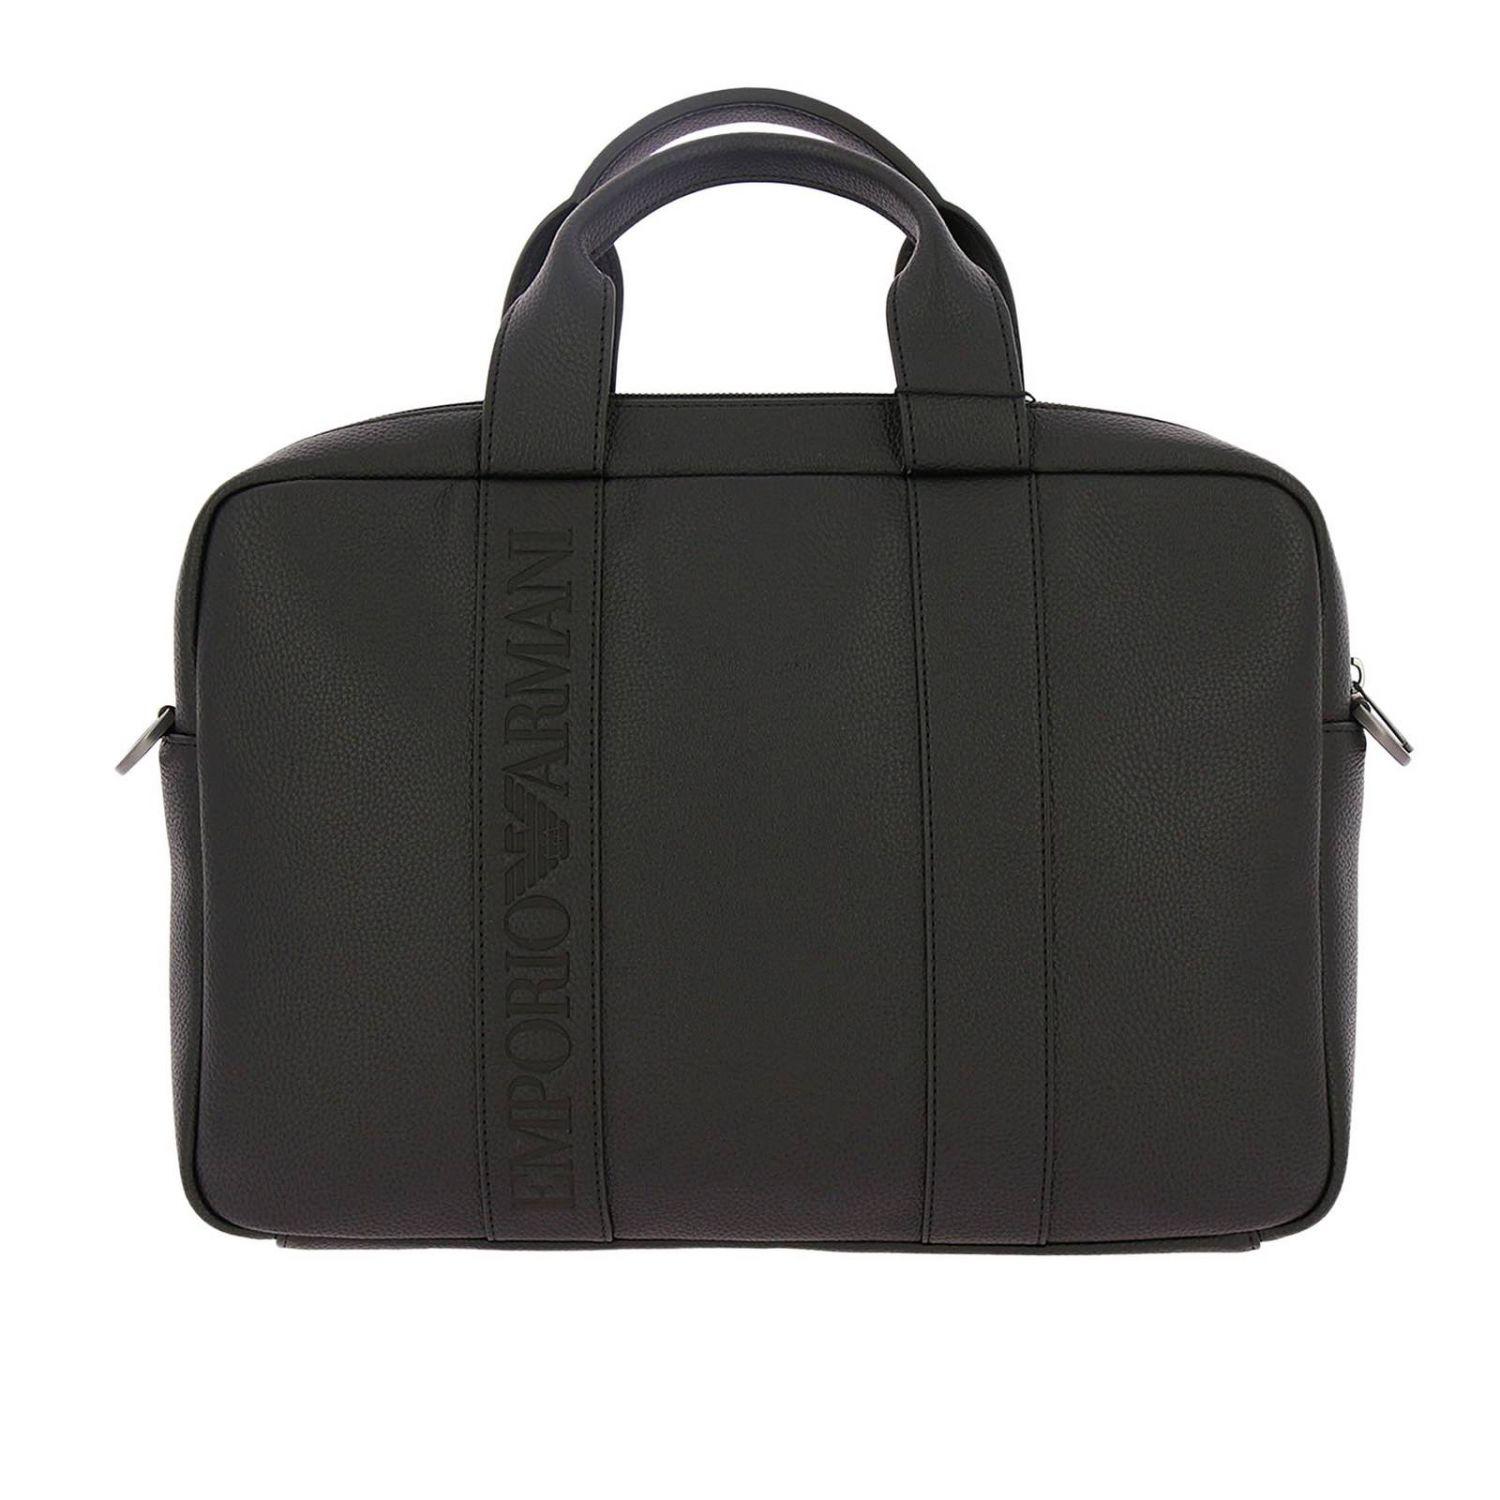 Emporio Armani Synthetic Travel Bag Bags Men in Black for Men - Lyst